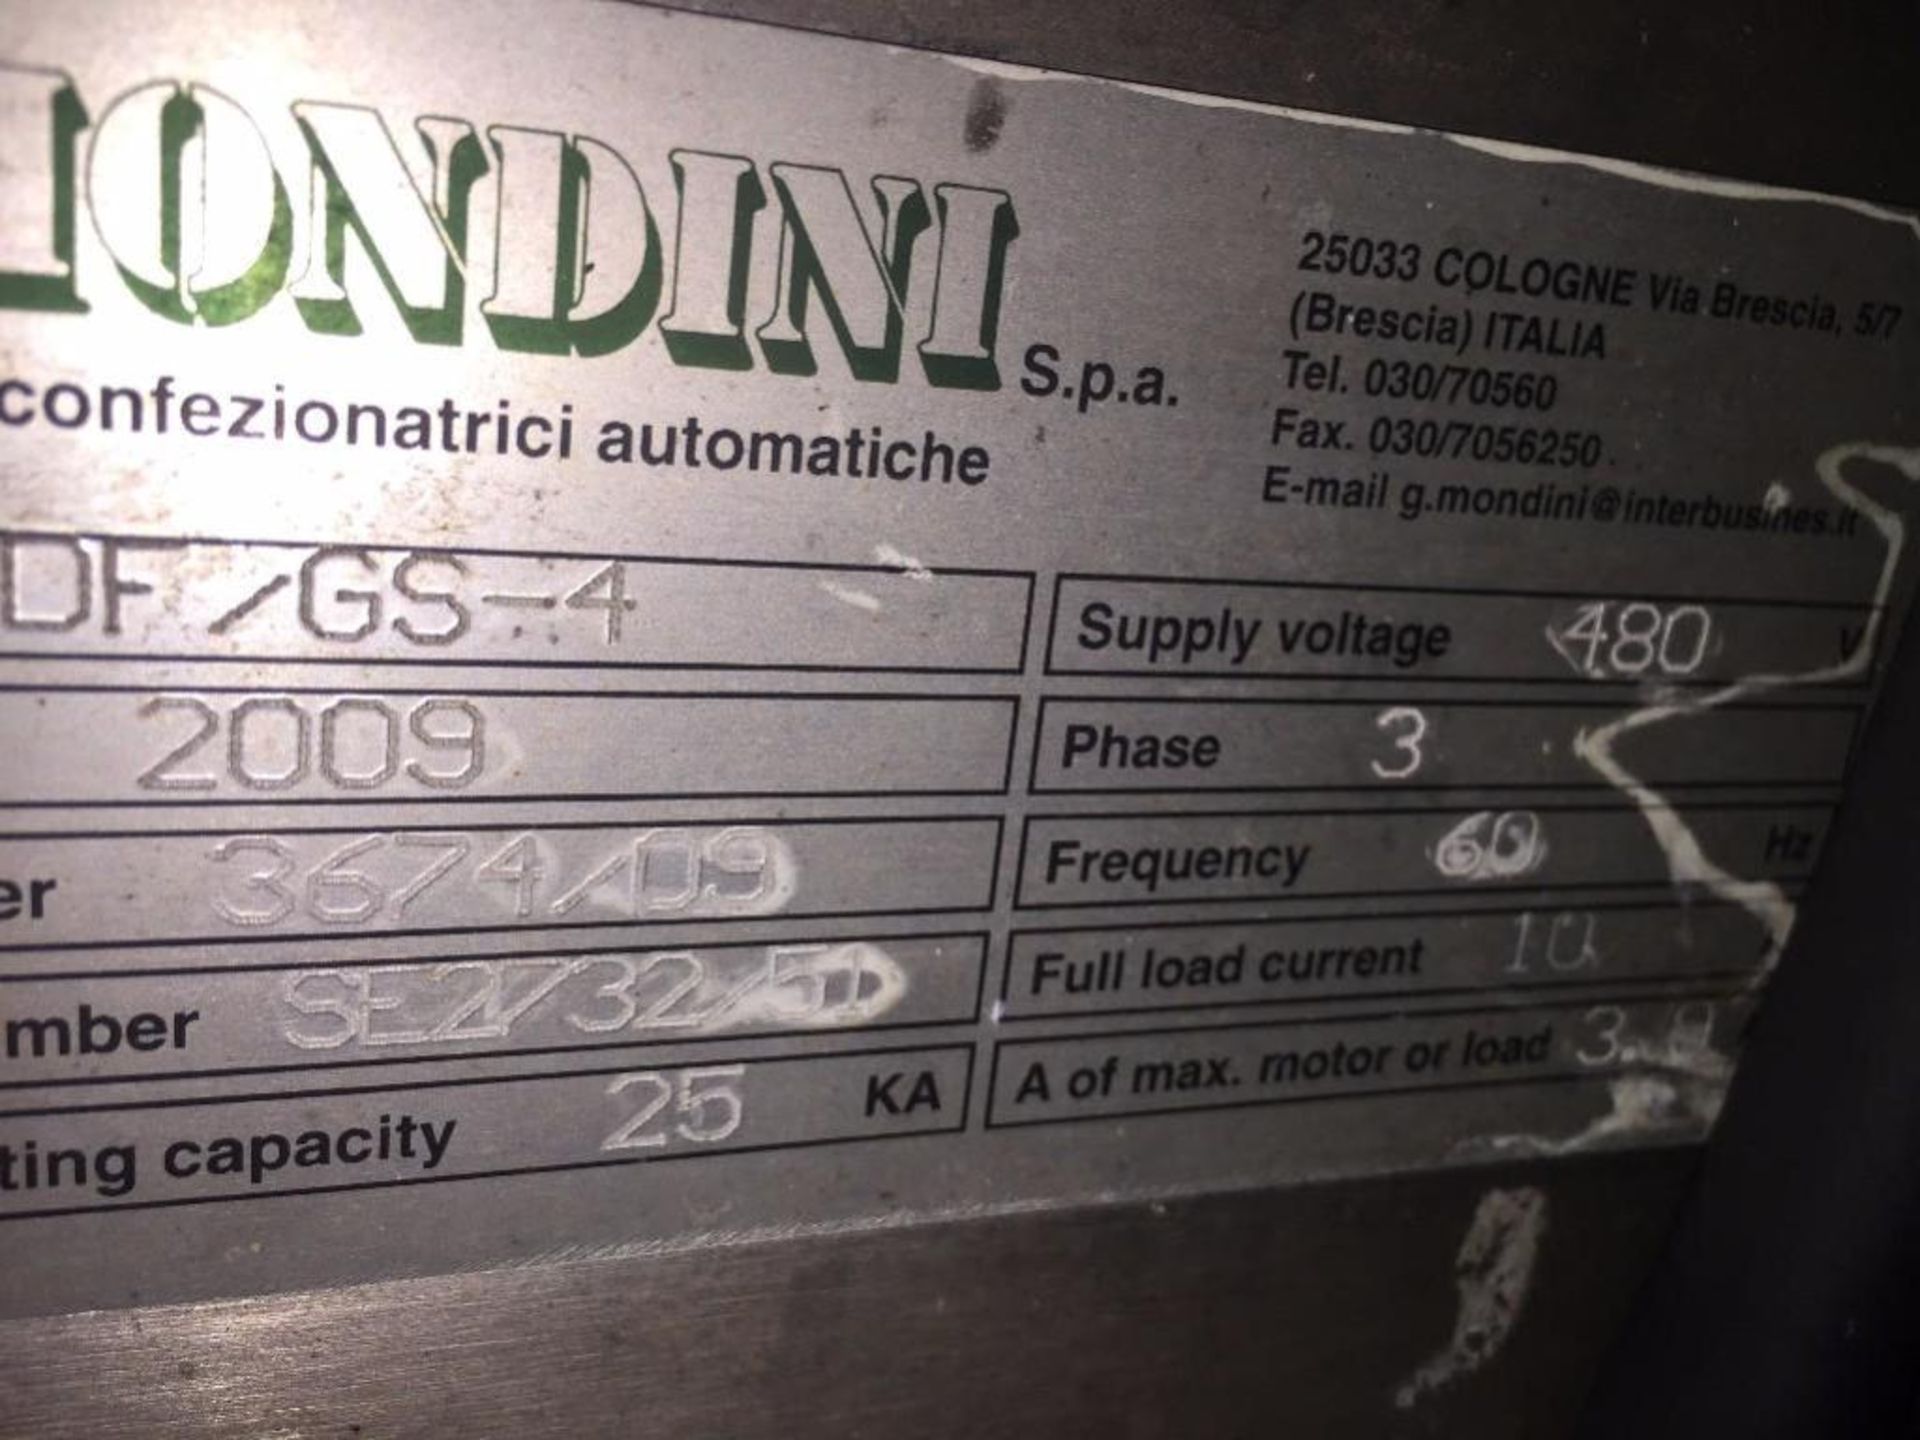 2009 Mondini cheese doser, model DF/GS-4, on wheels, with controls, panelview plus 750 controls and - Image 15 of 26